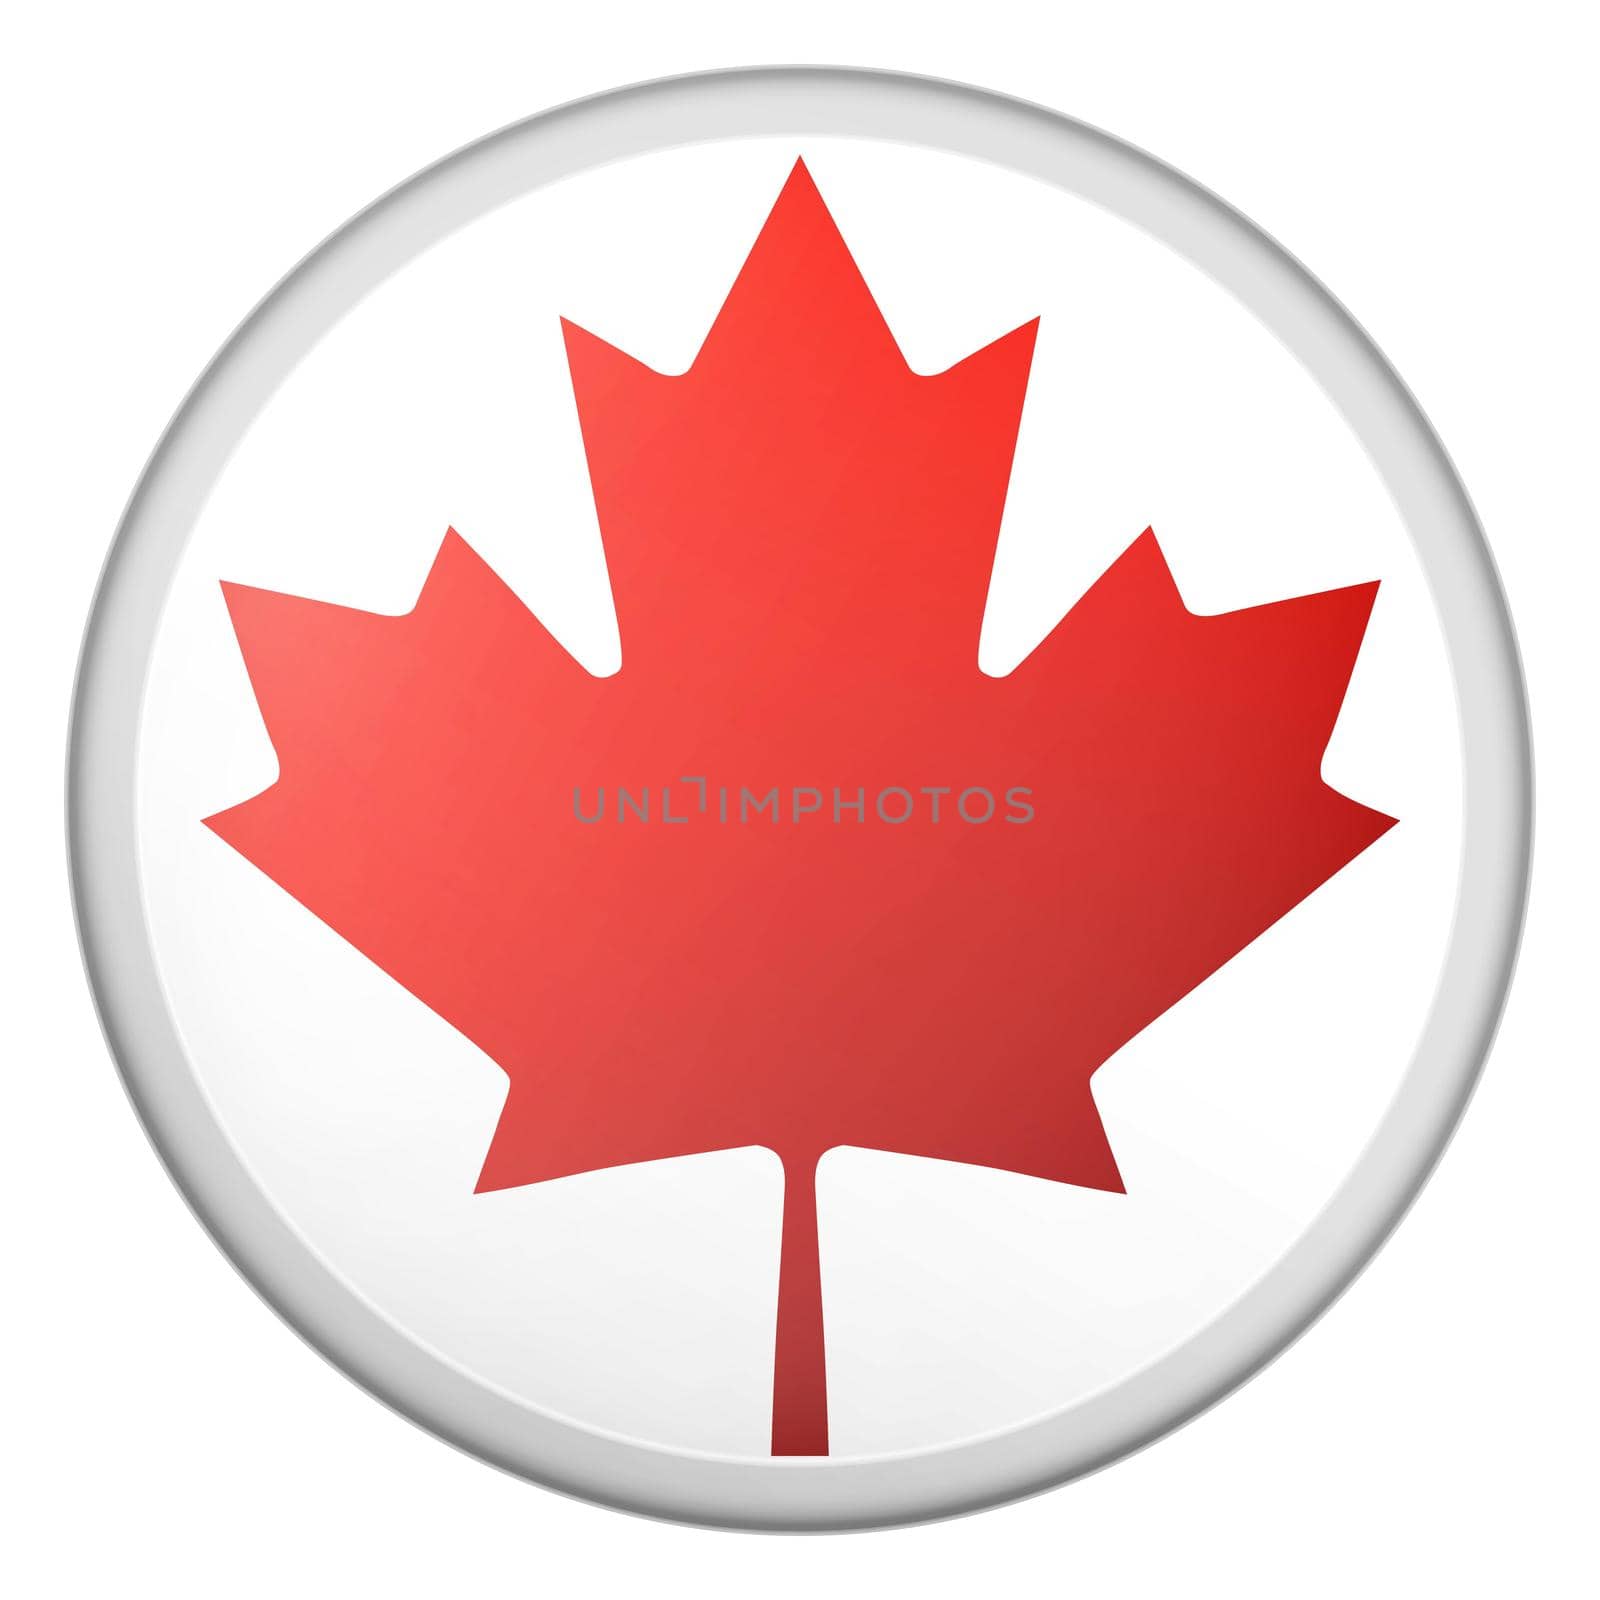 Glass light ball with flag of Canada. Round sphere, template icon. Canadian national symbol. Glossy realistic ball, 3D abstract vector illustration highlighted on a white background. Big bubble